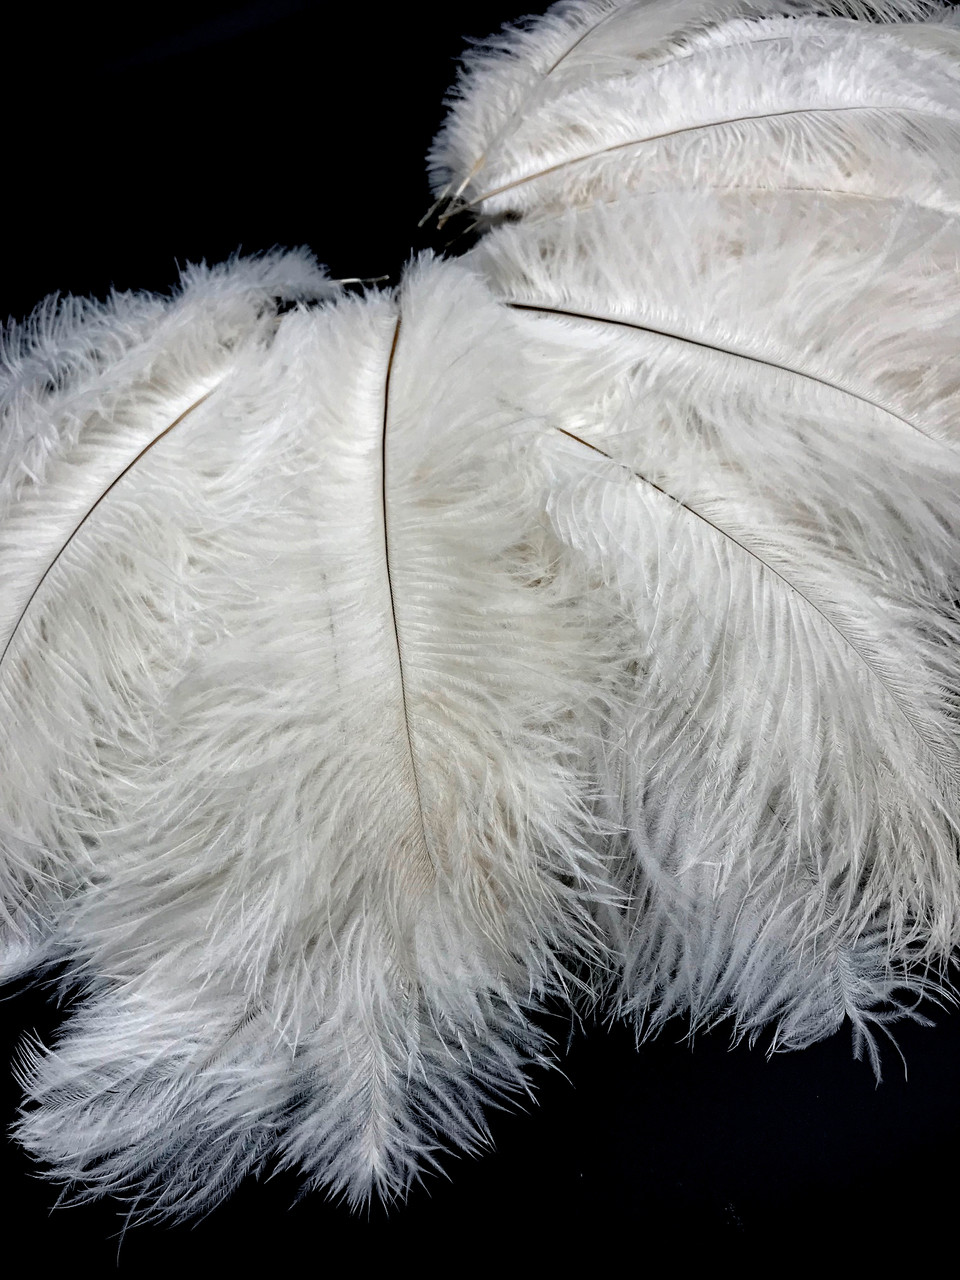 Feathers 100 Thin Real Ostrich Feathers in Black or White Feathers, Black  Feathers, White Feathers Wedding Hats Craft Projects 